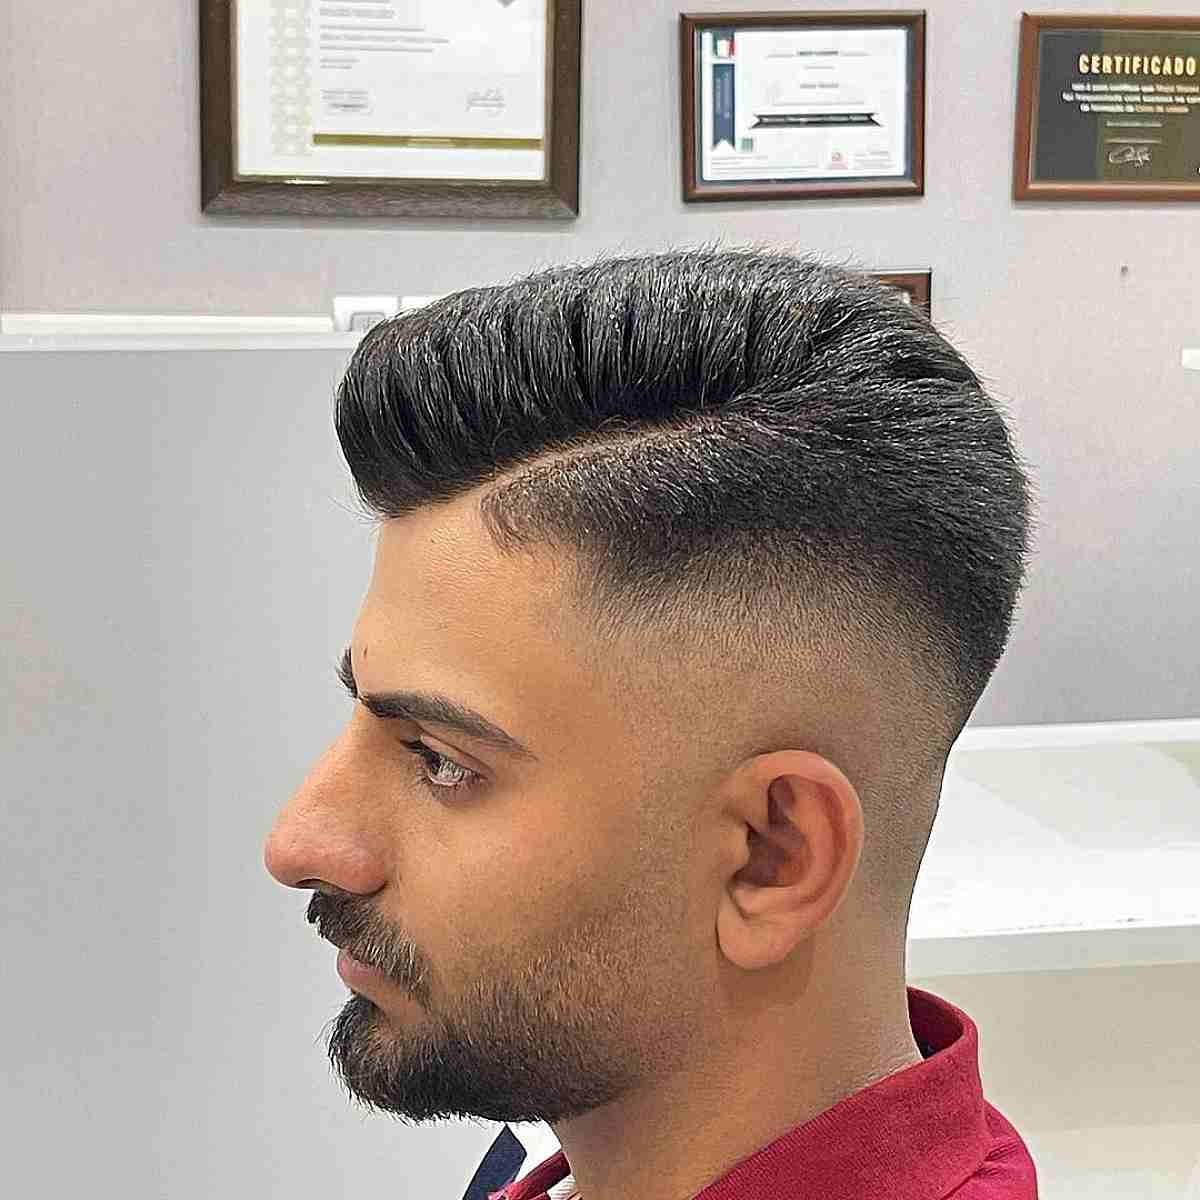 93 Coolest Boys Haircuts for School in 2023